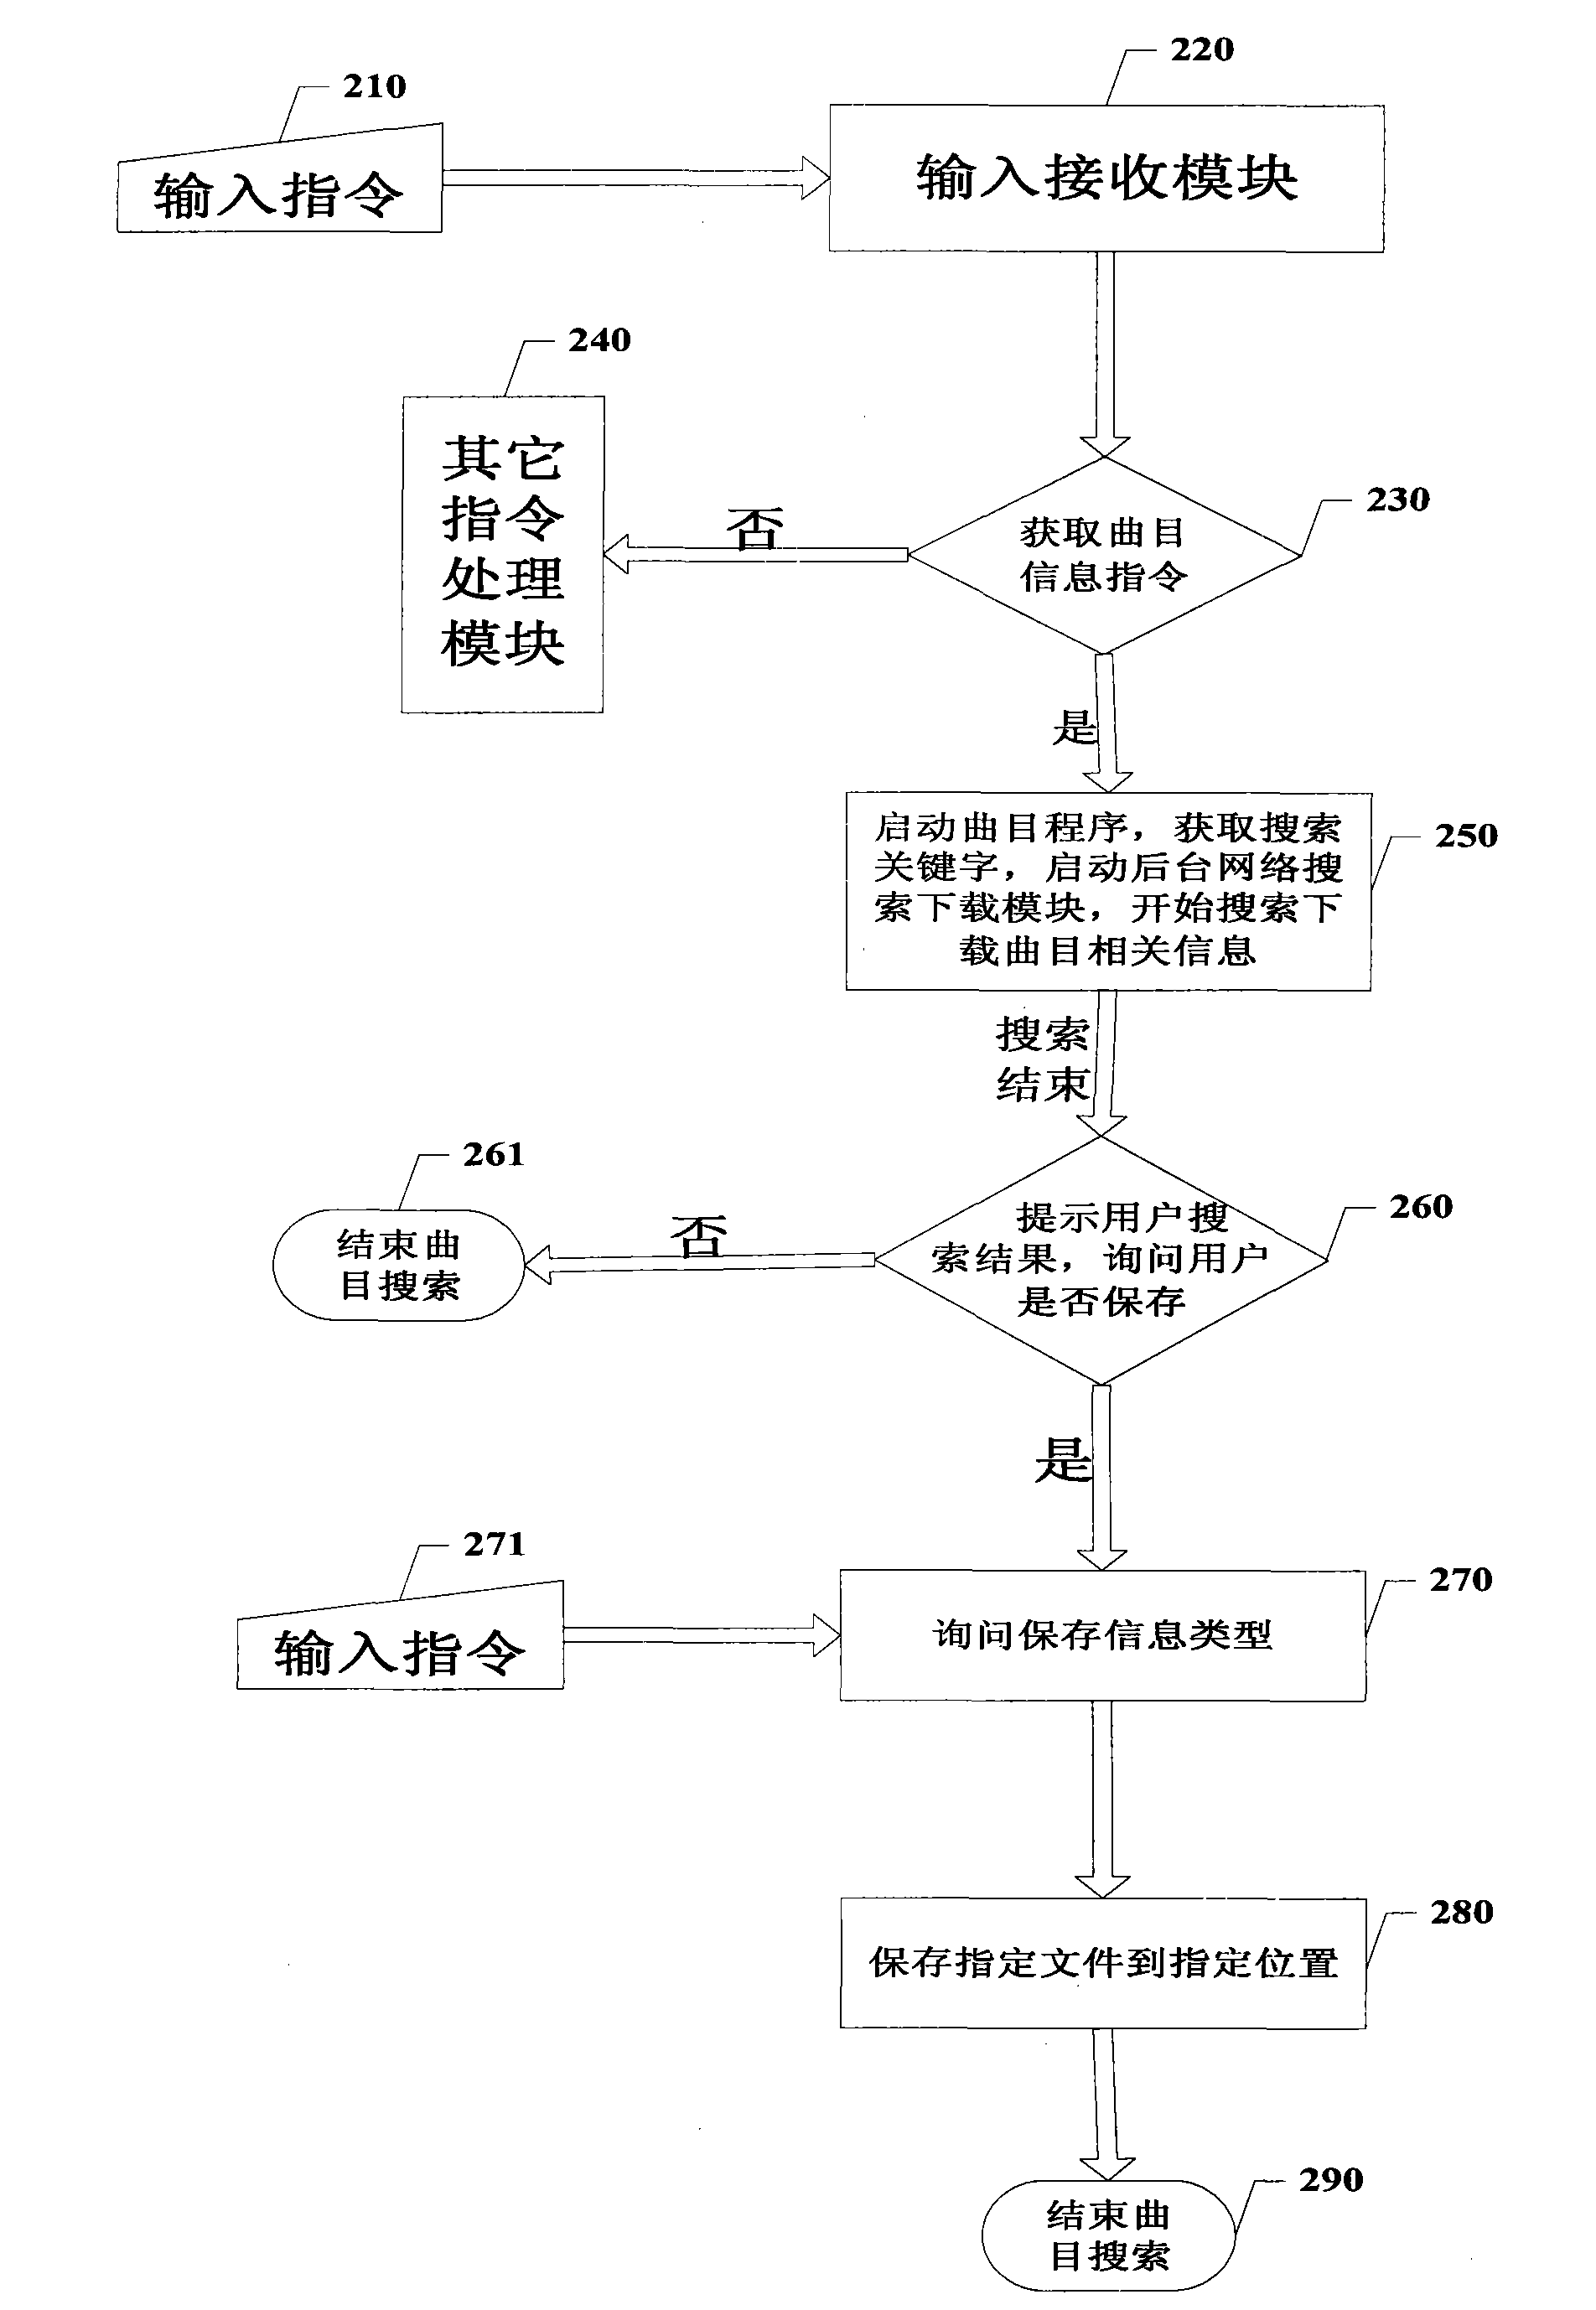 Method for automatically downloading interlude of television program and television